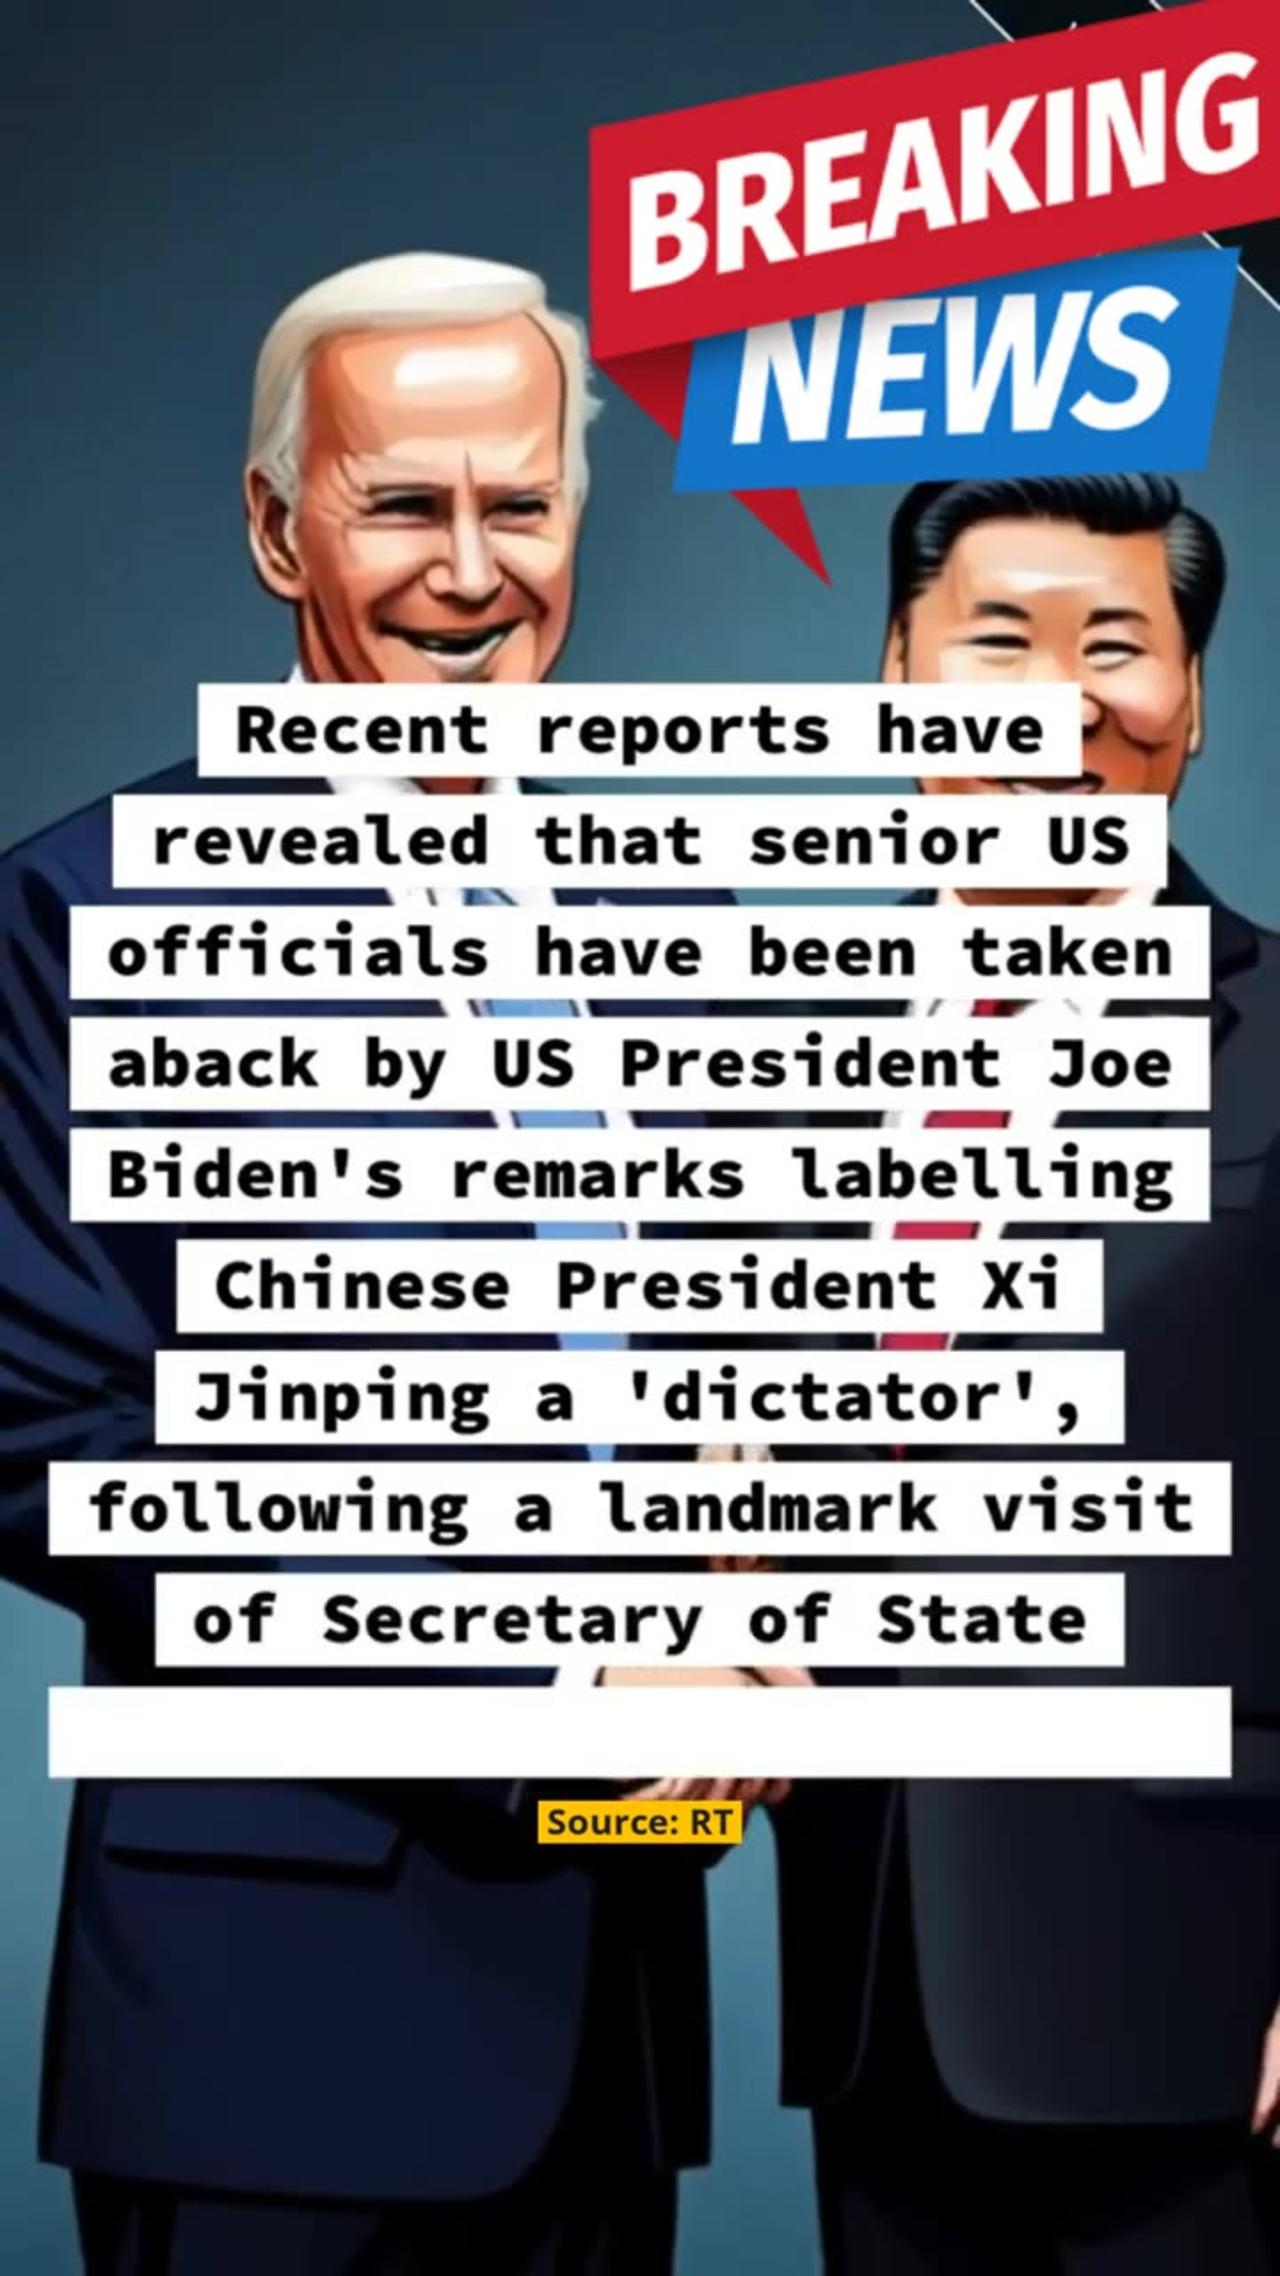 US Officials Caught Off Guard by Biden’s ‘Xi dictator’ Remarks